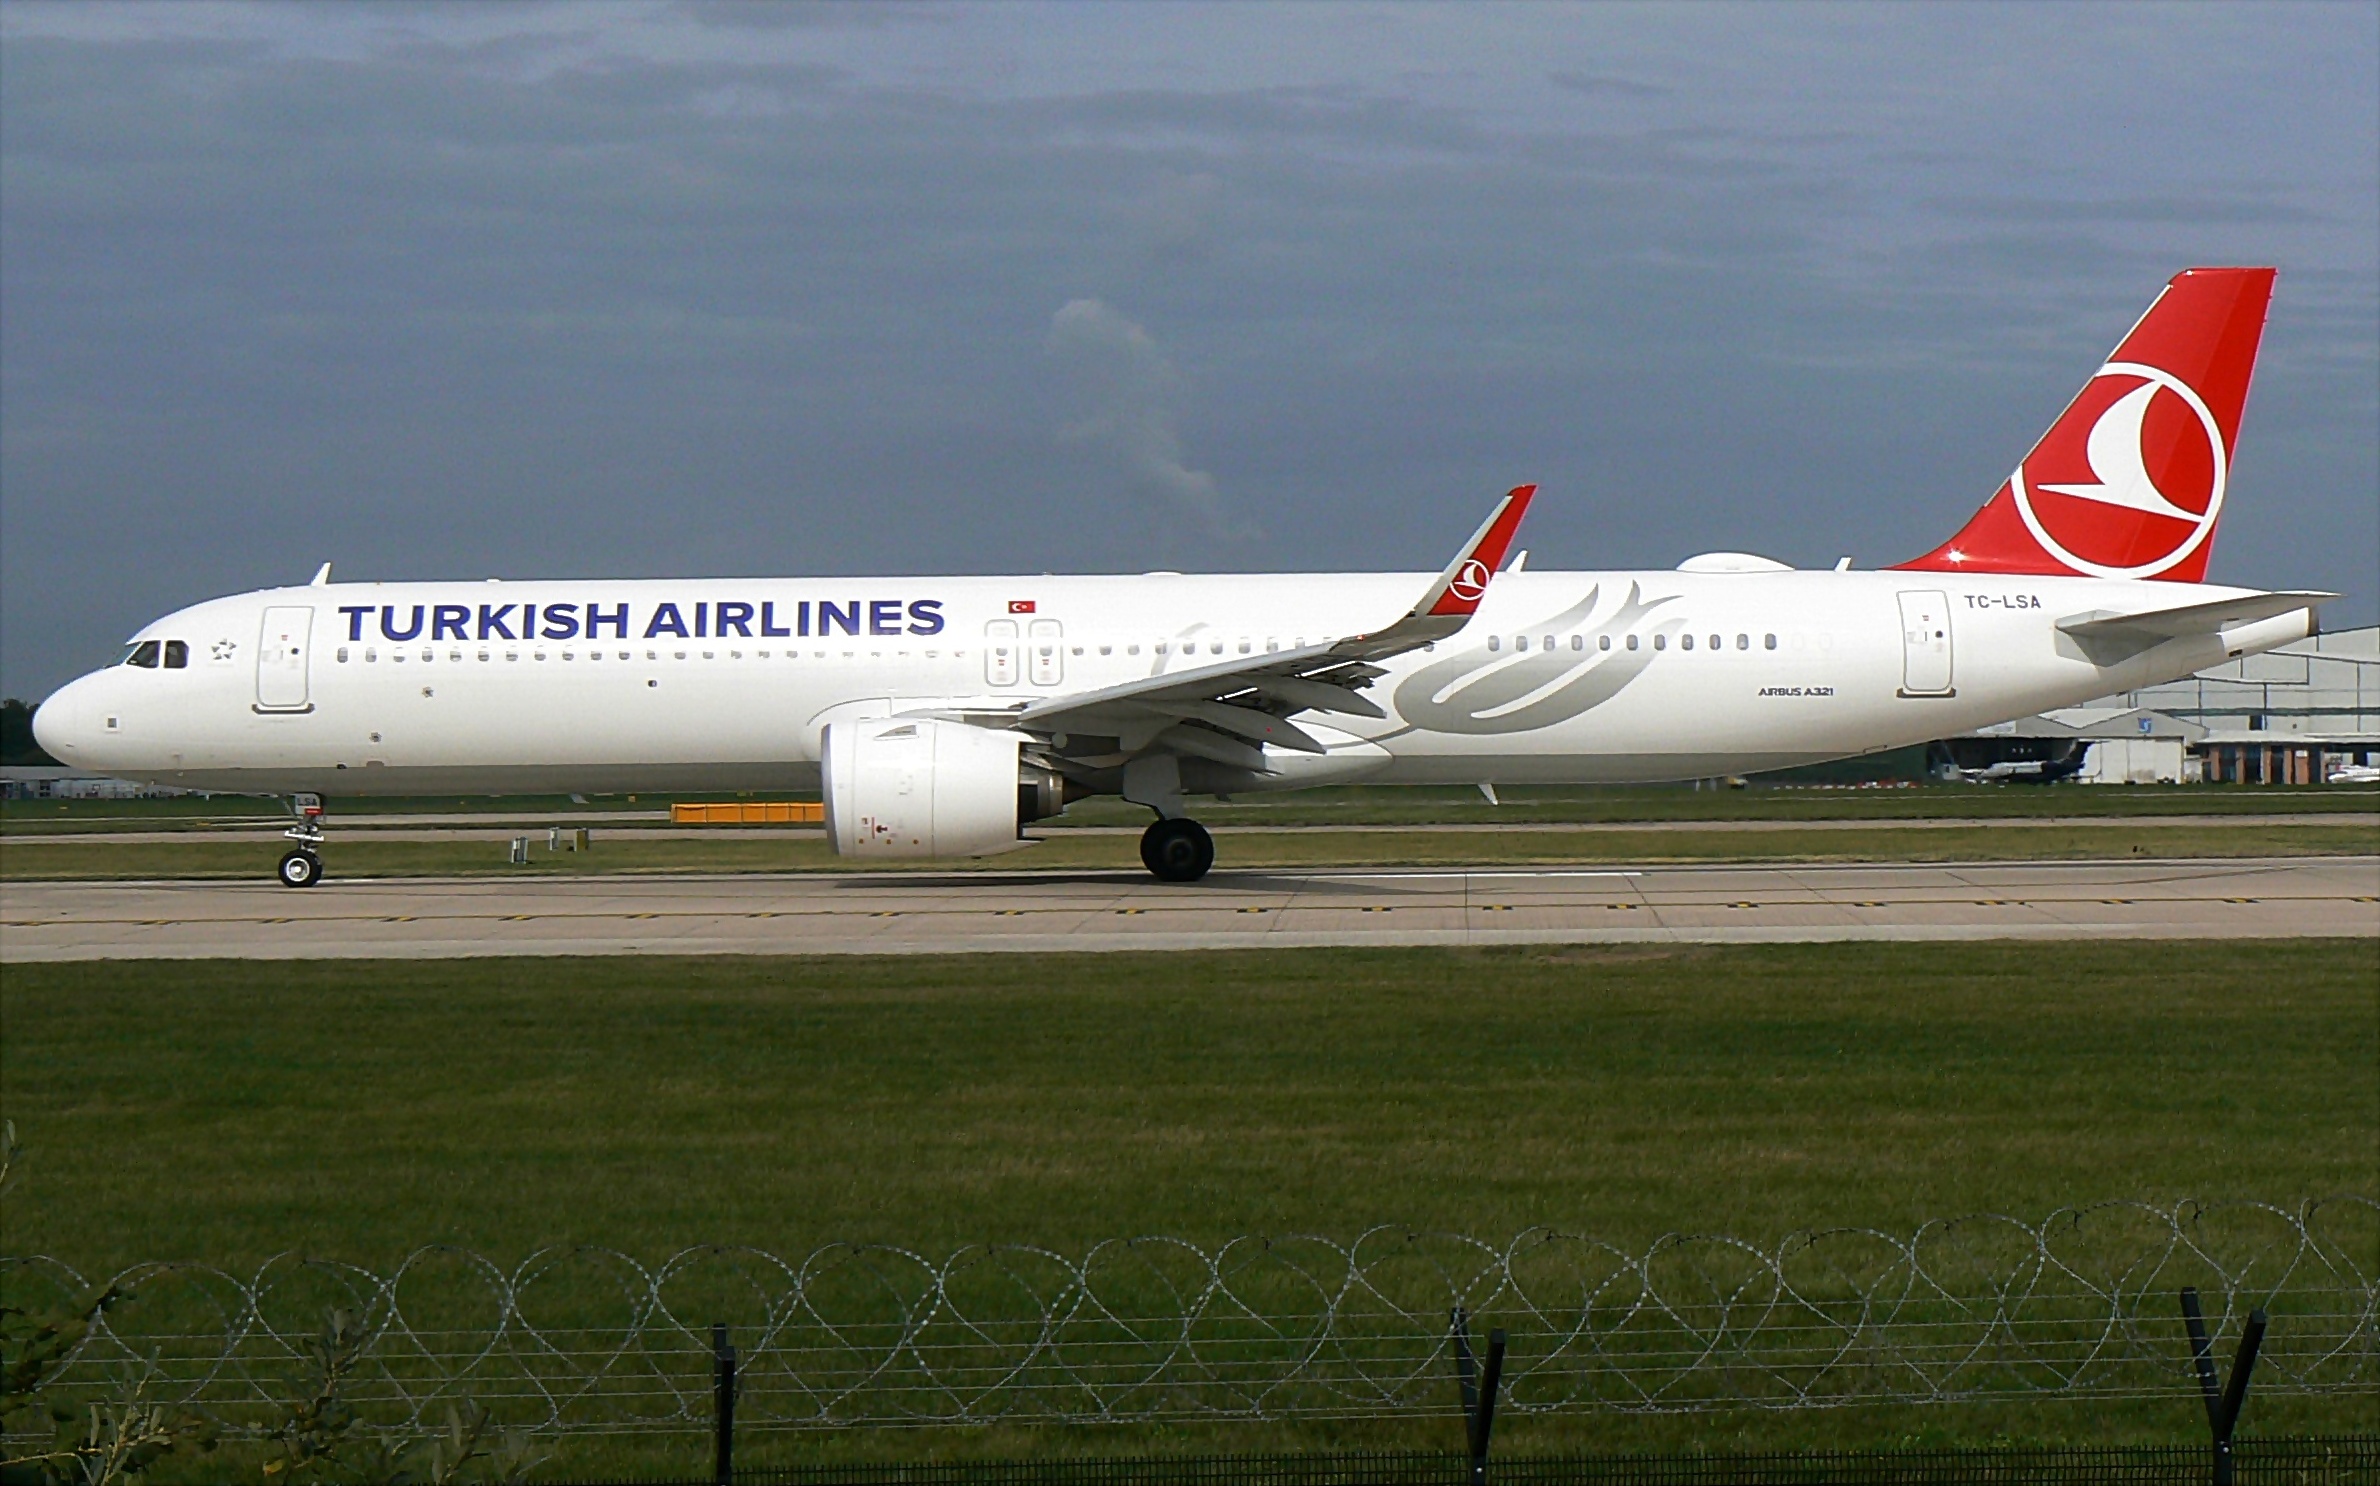 Turkish Airlines a321neo. Airbus a321 Turkish Airlines. TC-gre a321. Airbus a321 Туркиш Эйрлайнс. Туркиш эйрлайнс отзывы